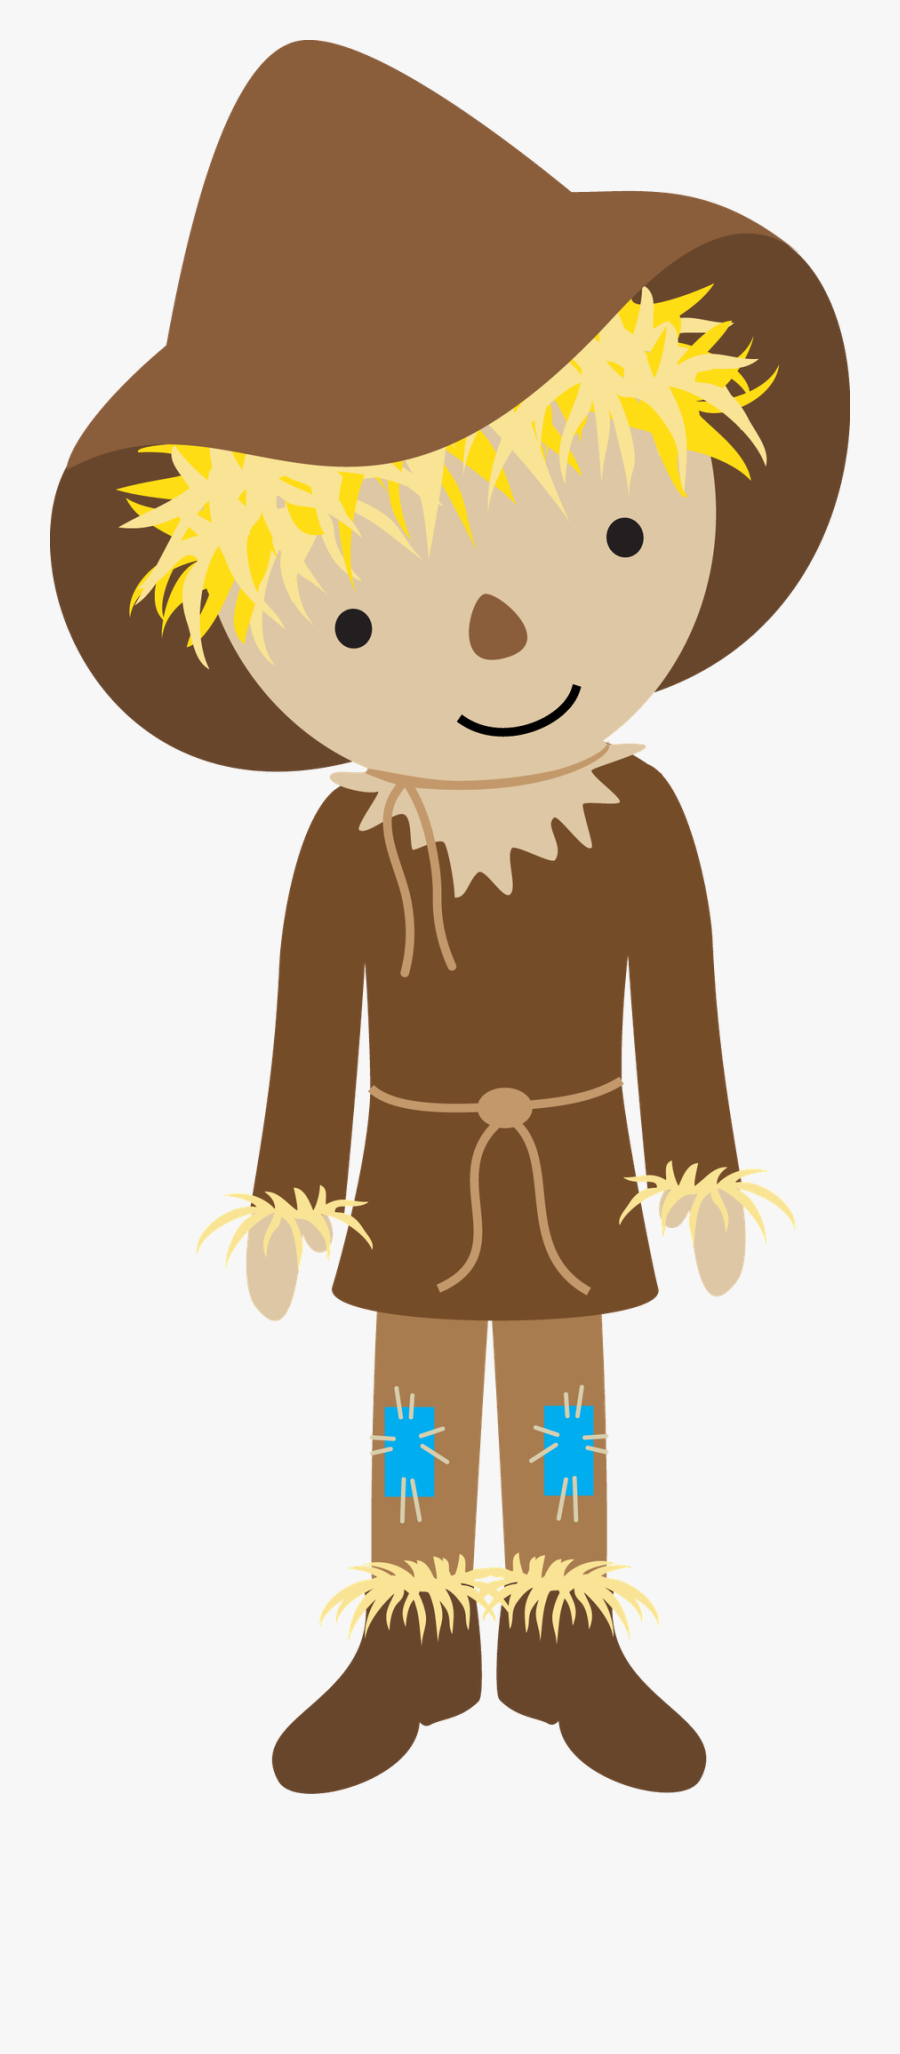 Scarecrow Thinking Cliparts - Scarecrow Wizard Of Oz Clipart, Transparent Clipart